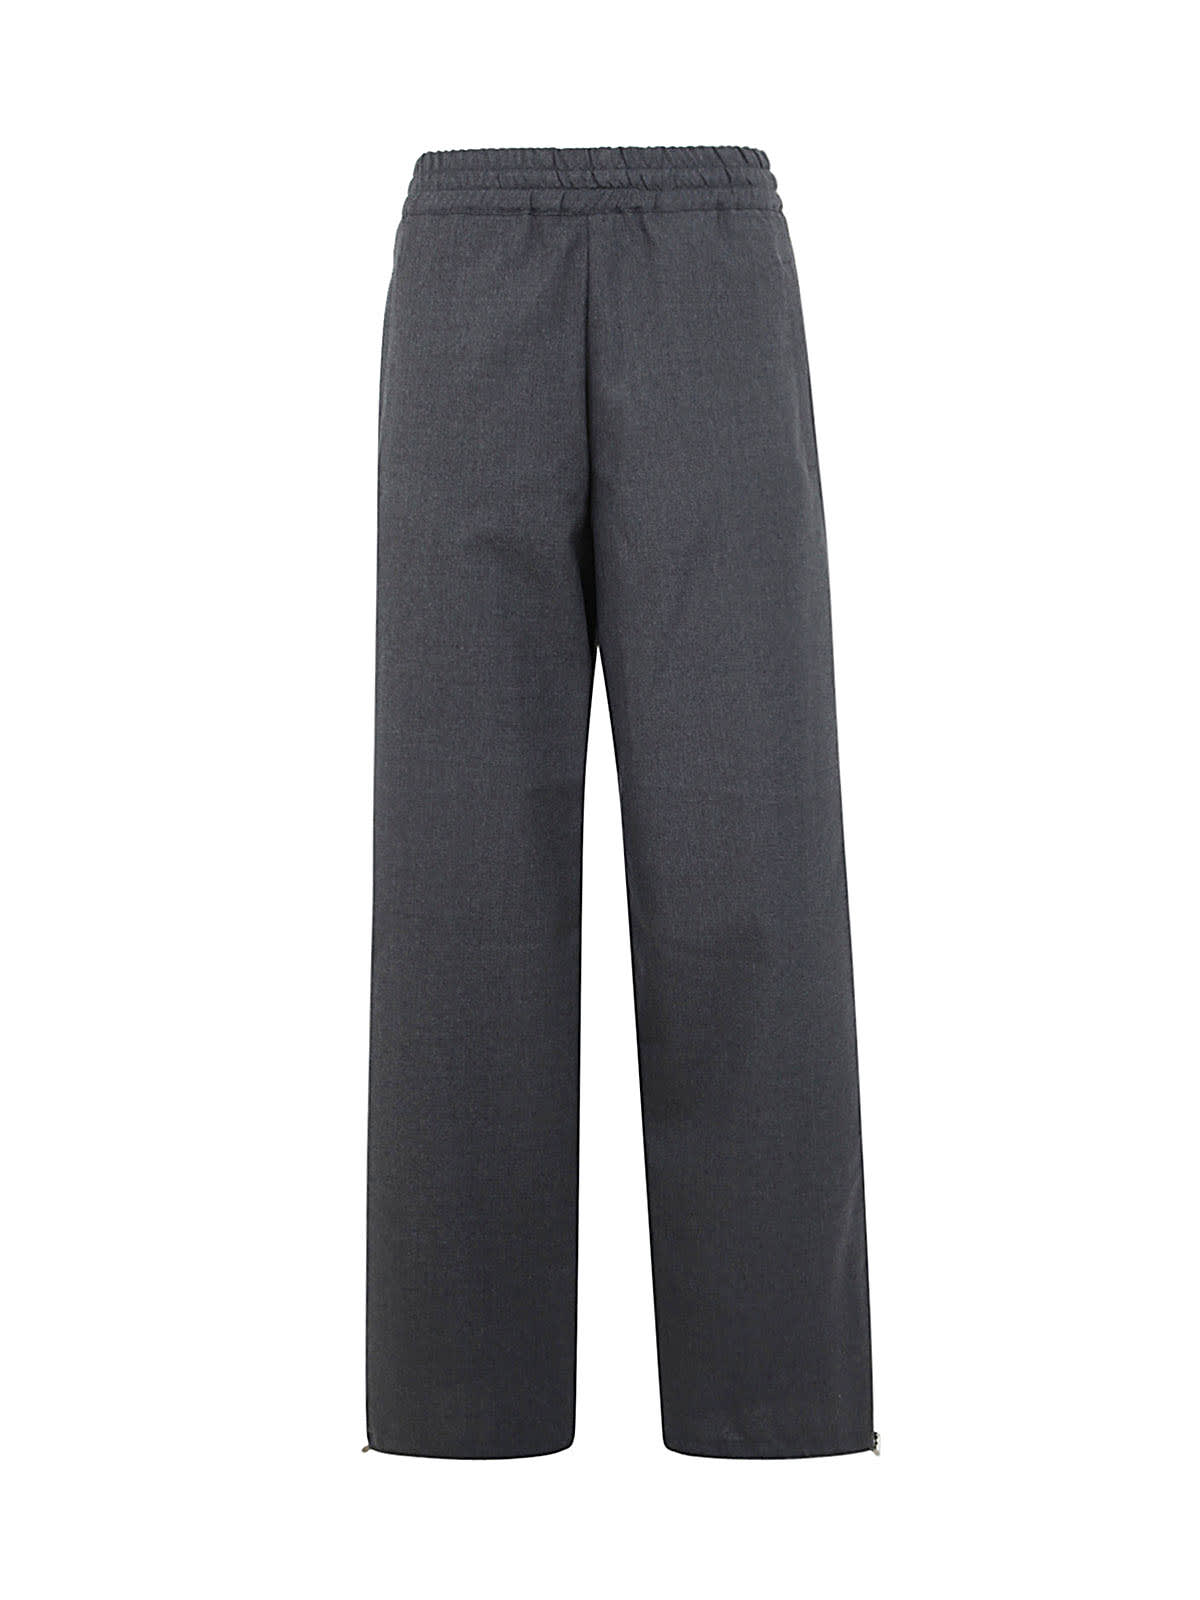 J.W. Anderson Tailored Tracksuit Trousers